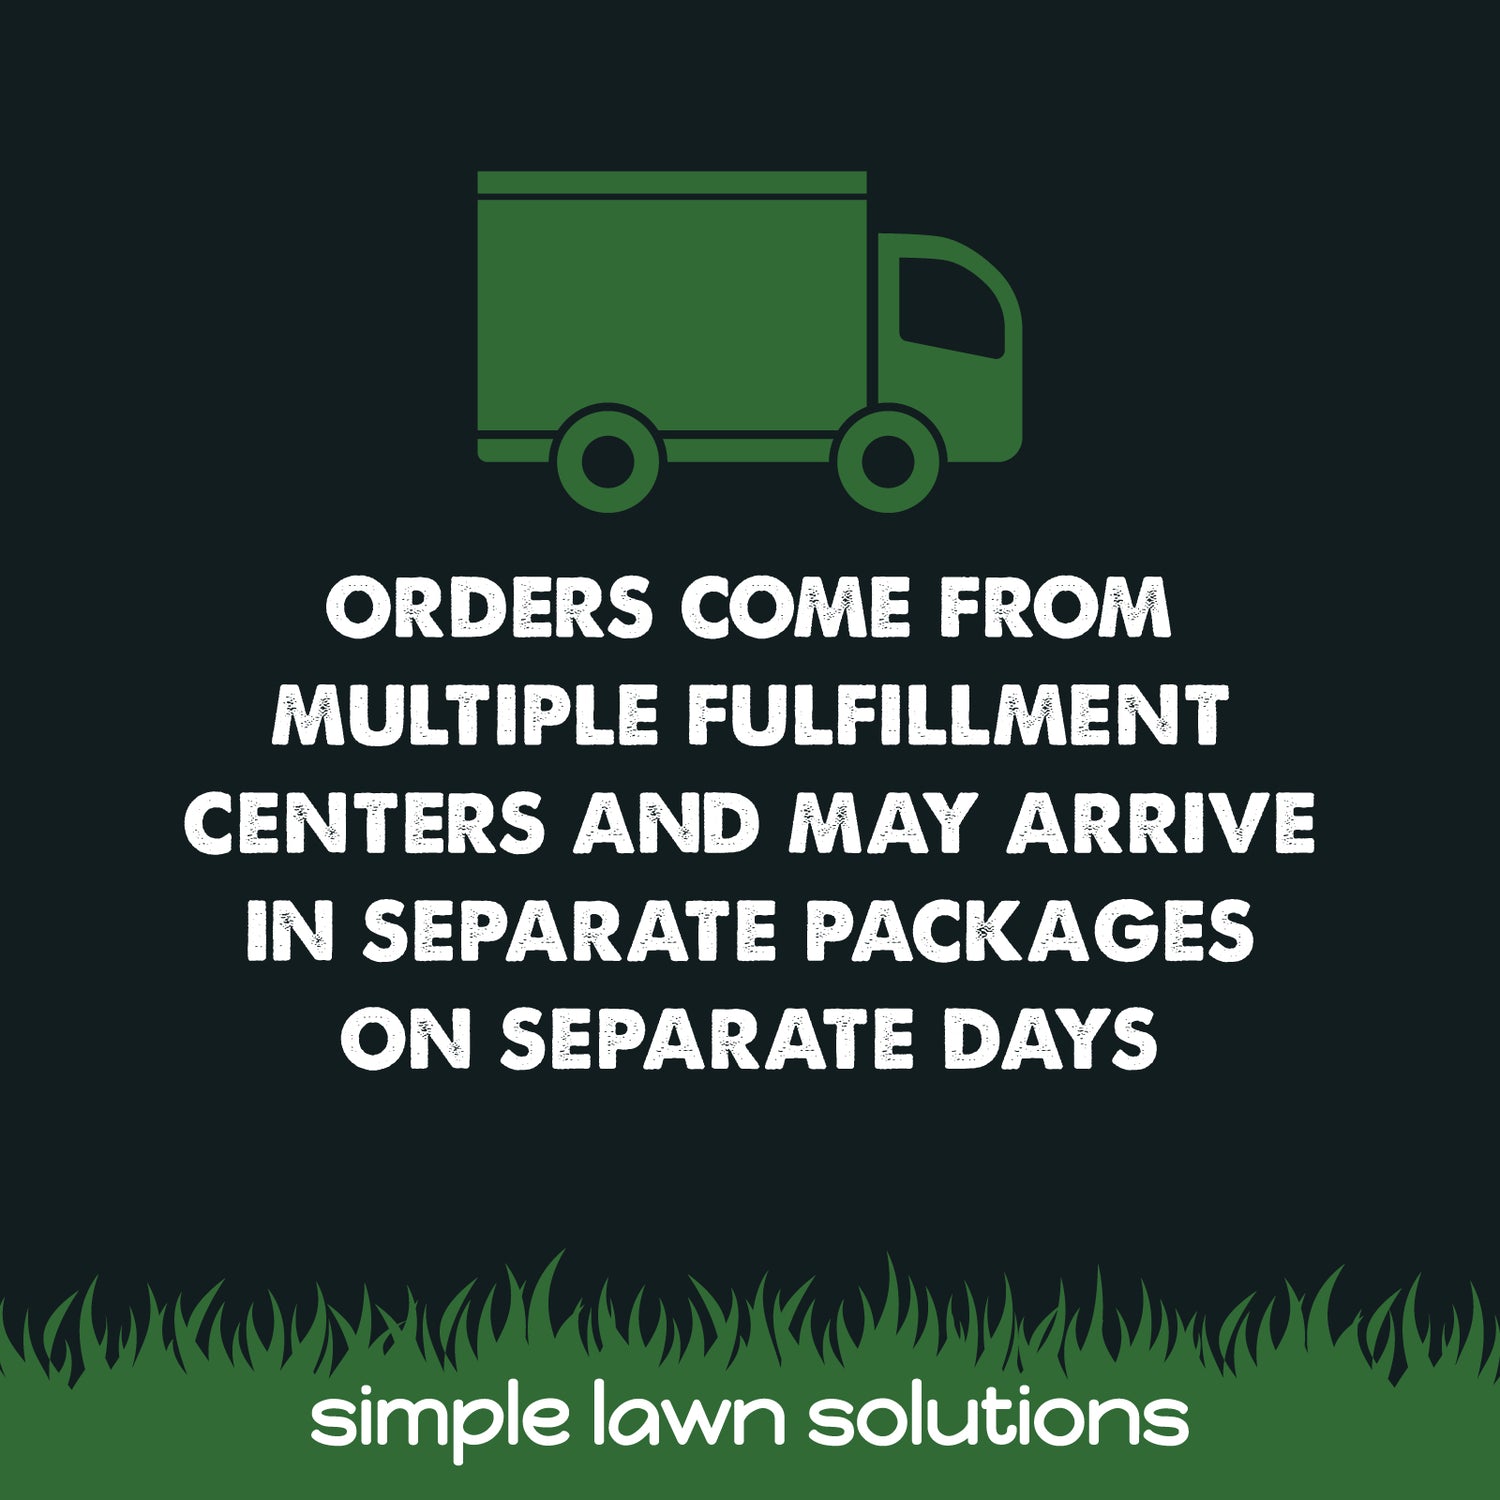 Orders may come from multiple fulfillment centers and may arrive In separate packages on separate days.